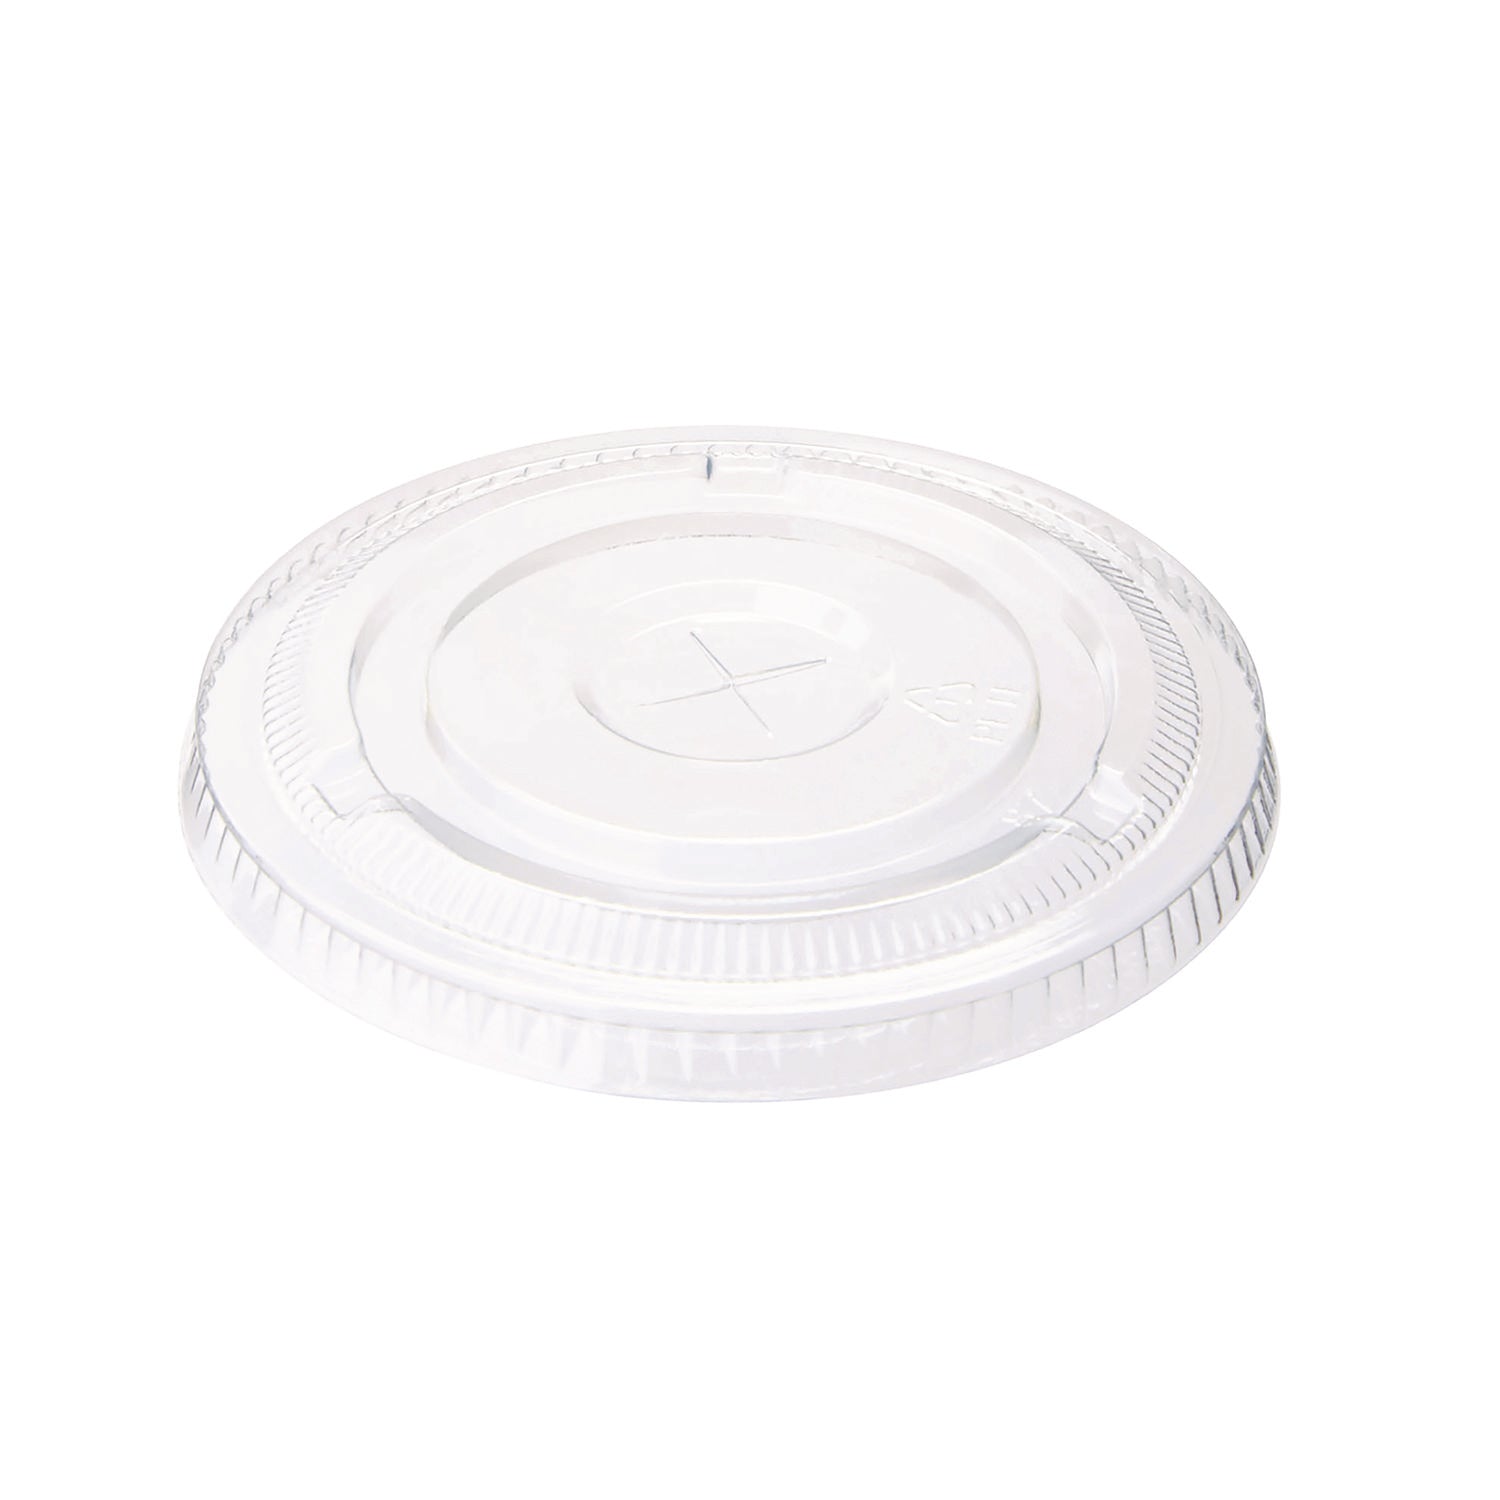 Cold Drink Cup Lids, Fits 16 oz Plastic Cold Cups, Clear, 100/Sleeve, 10 Sleeves/Carton - 1